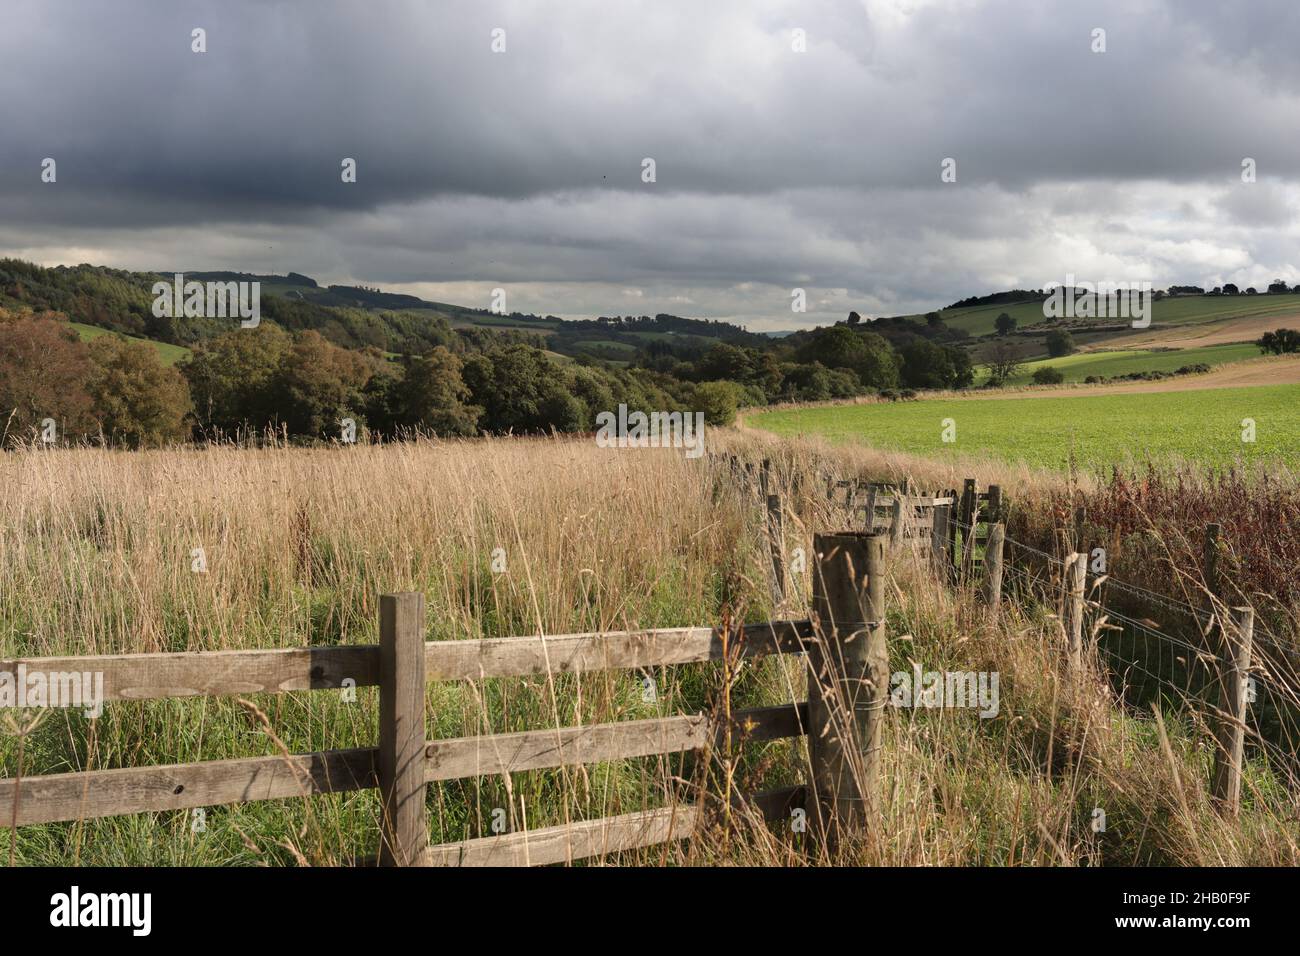 Farmland in the Scottish highlands. A wooden fence in the foreground. Cloudy sky. Stock Photo